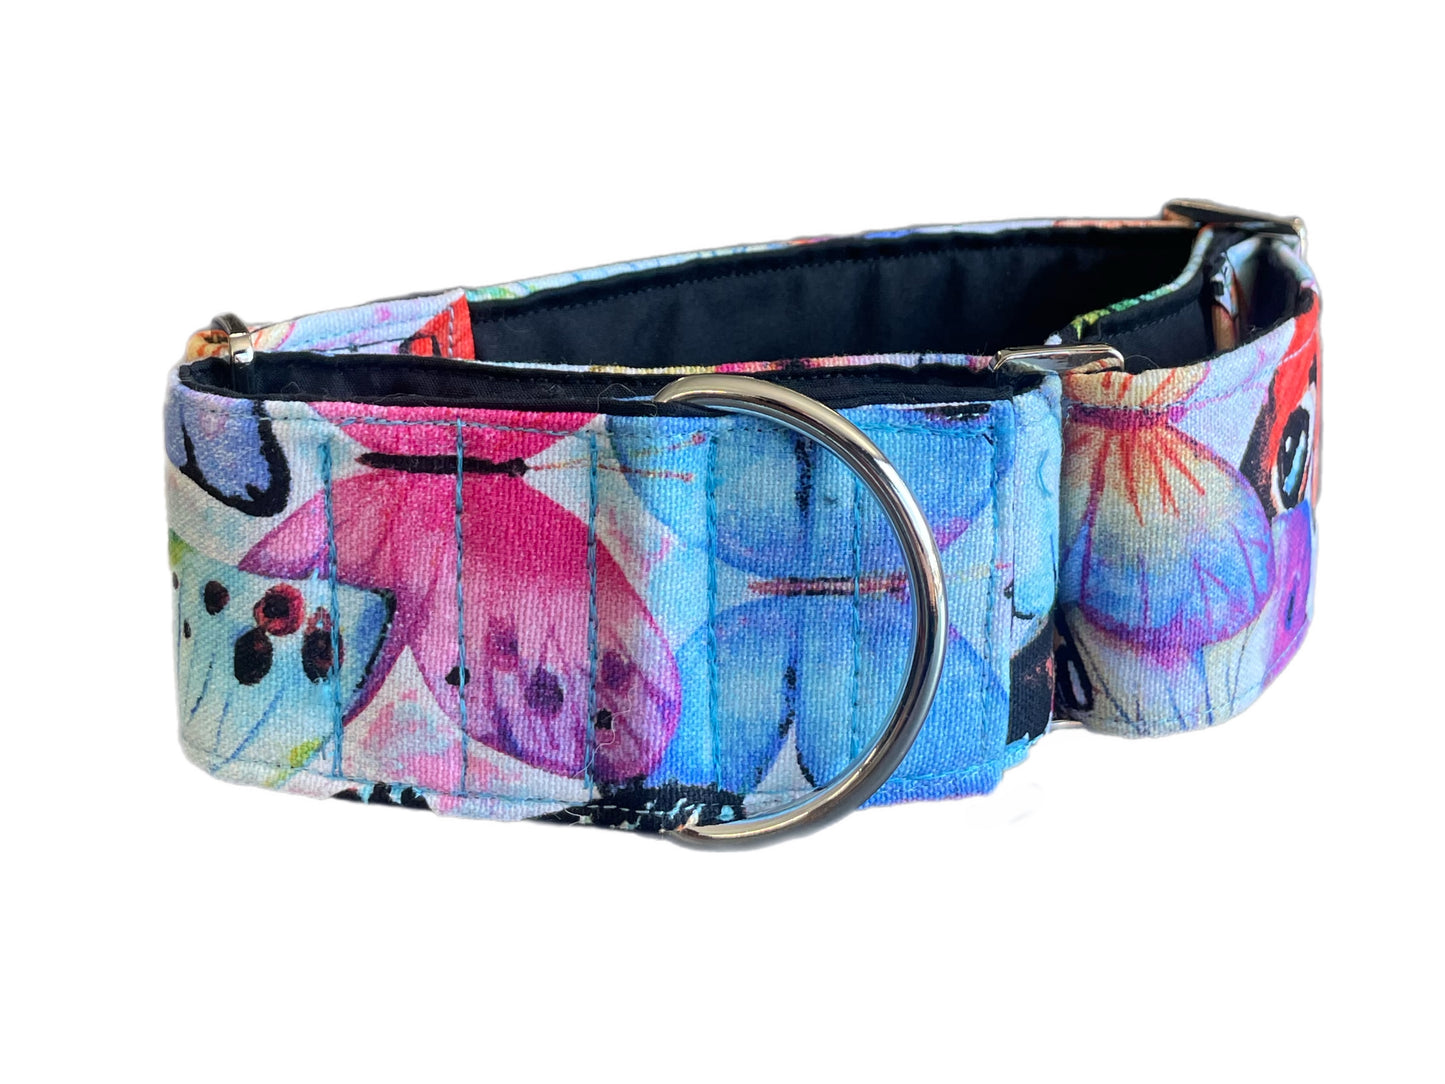 Big butterflies design in pastel colors greyhound Martingale collar cotton covered 50mm width